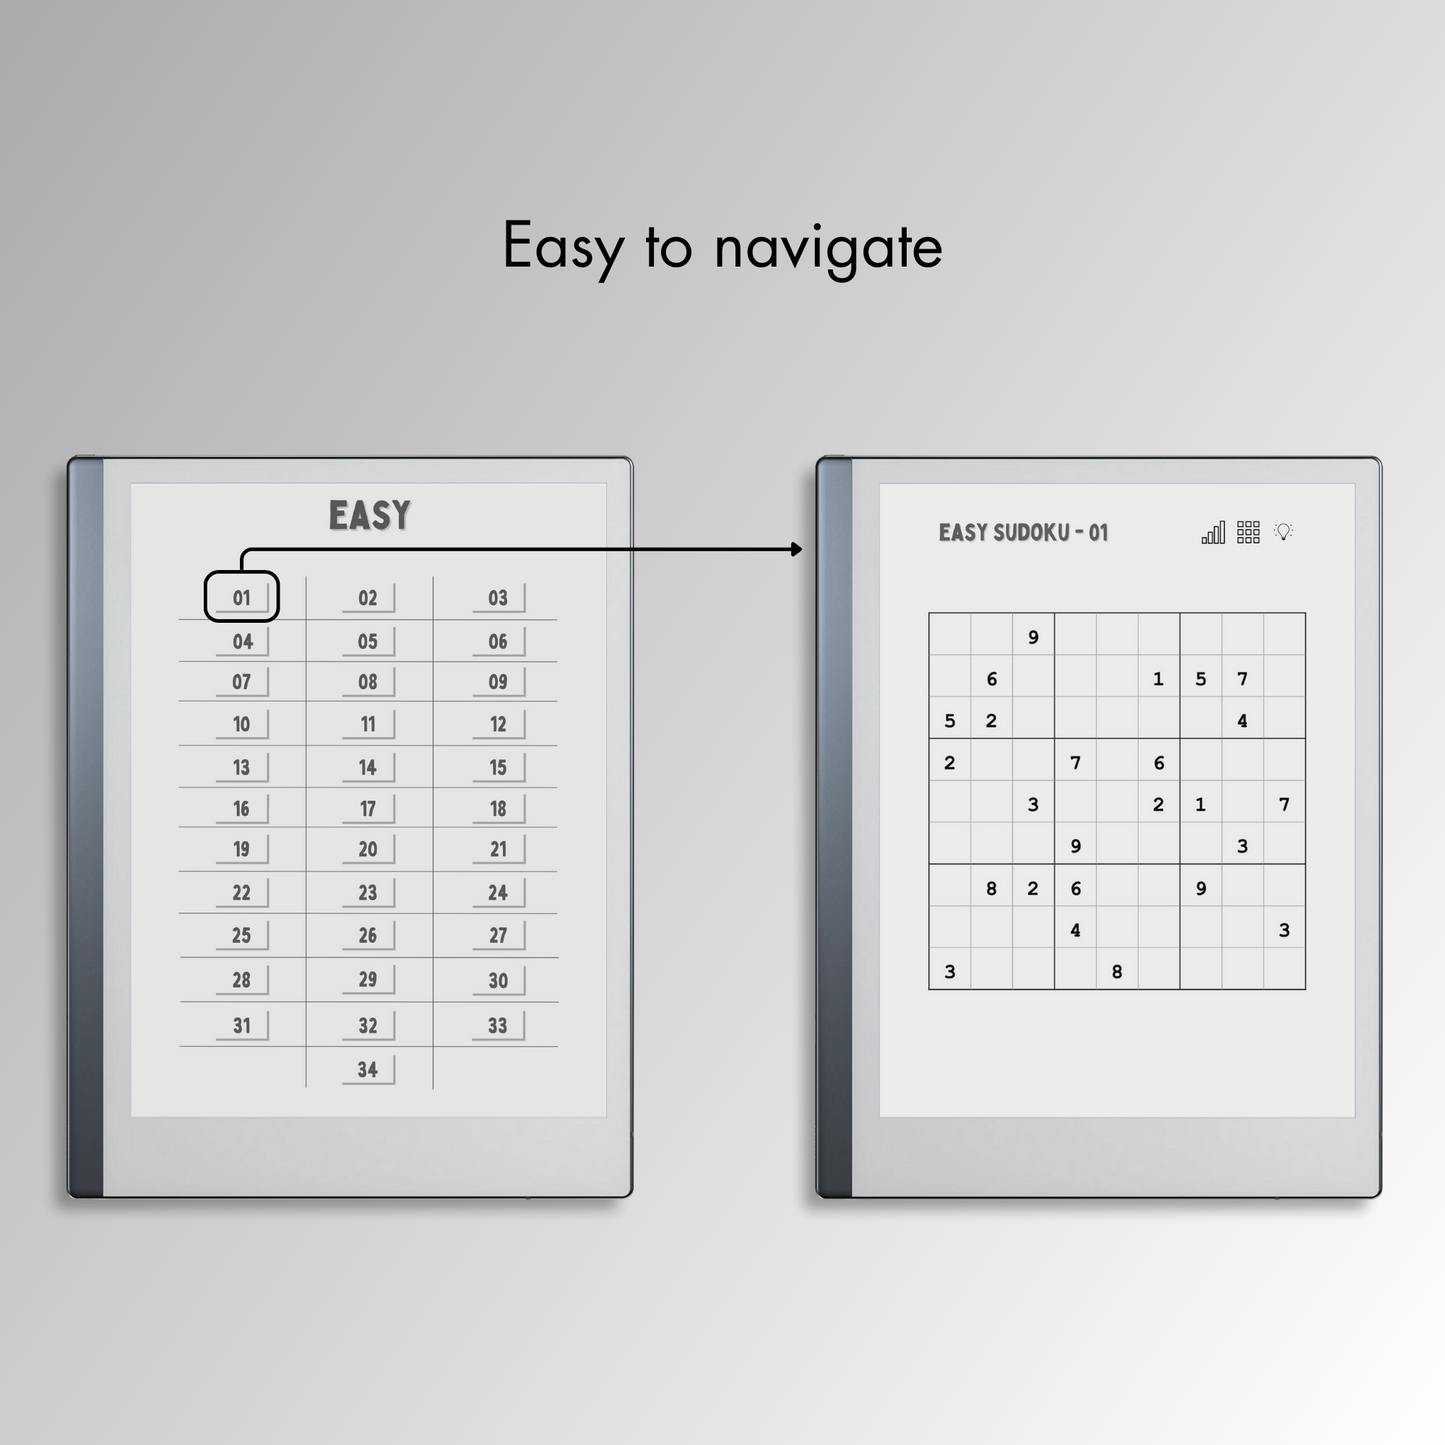 Remarkable 2 Sudoku Puzzles with easy navigations.